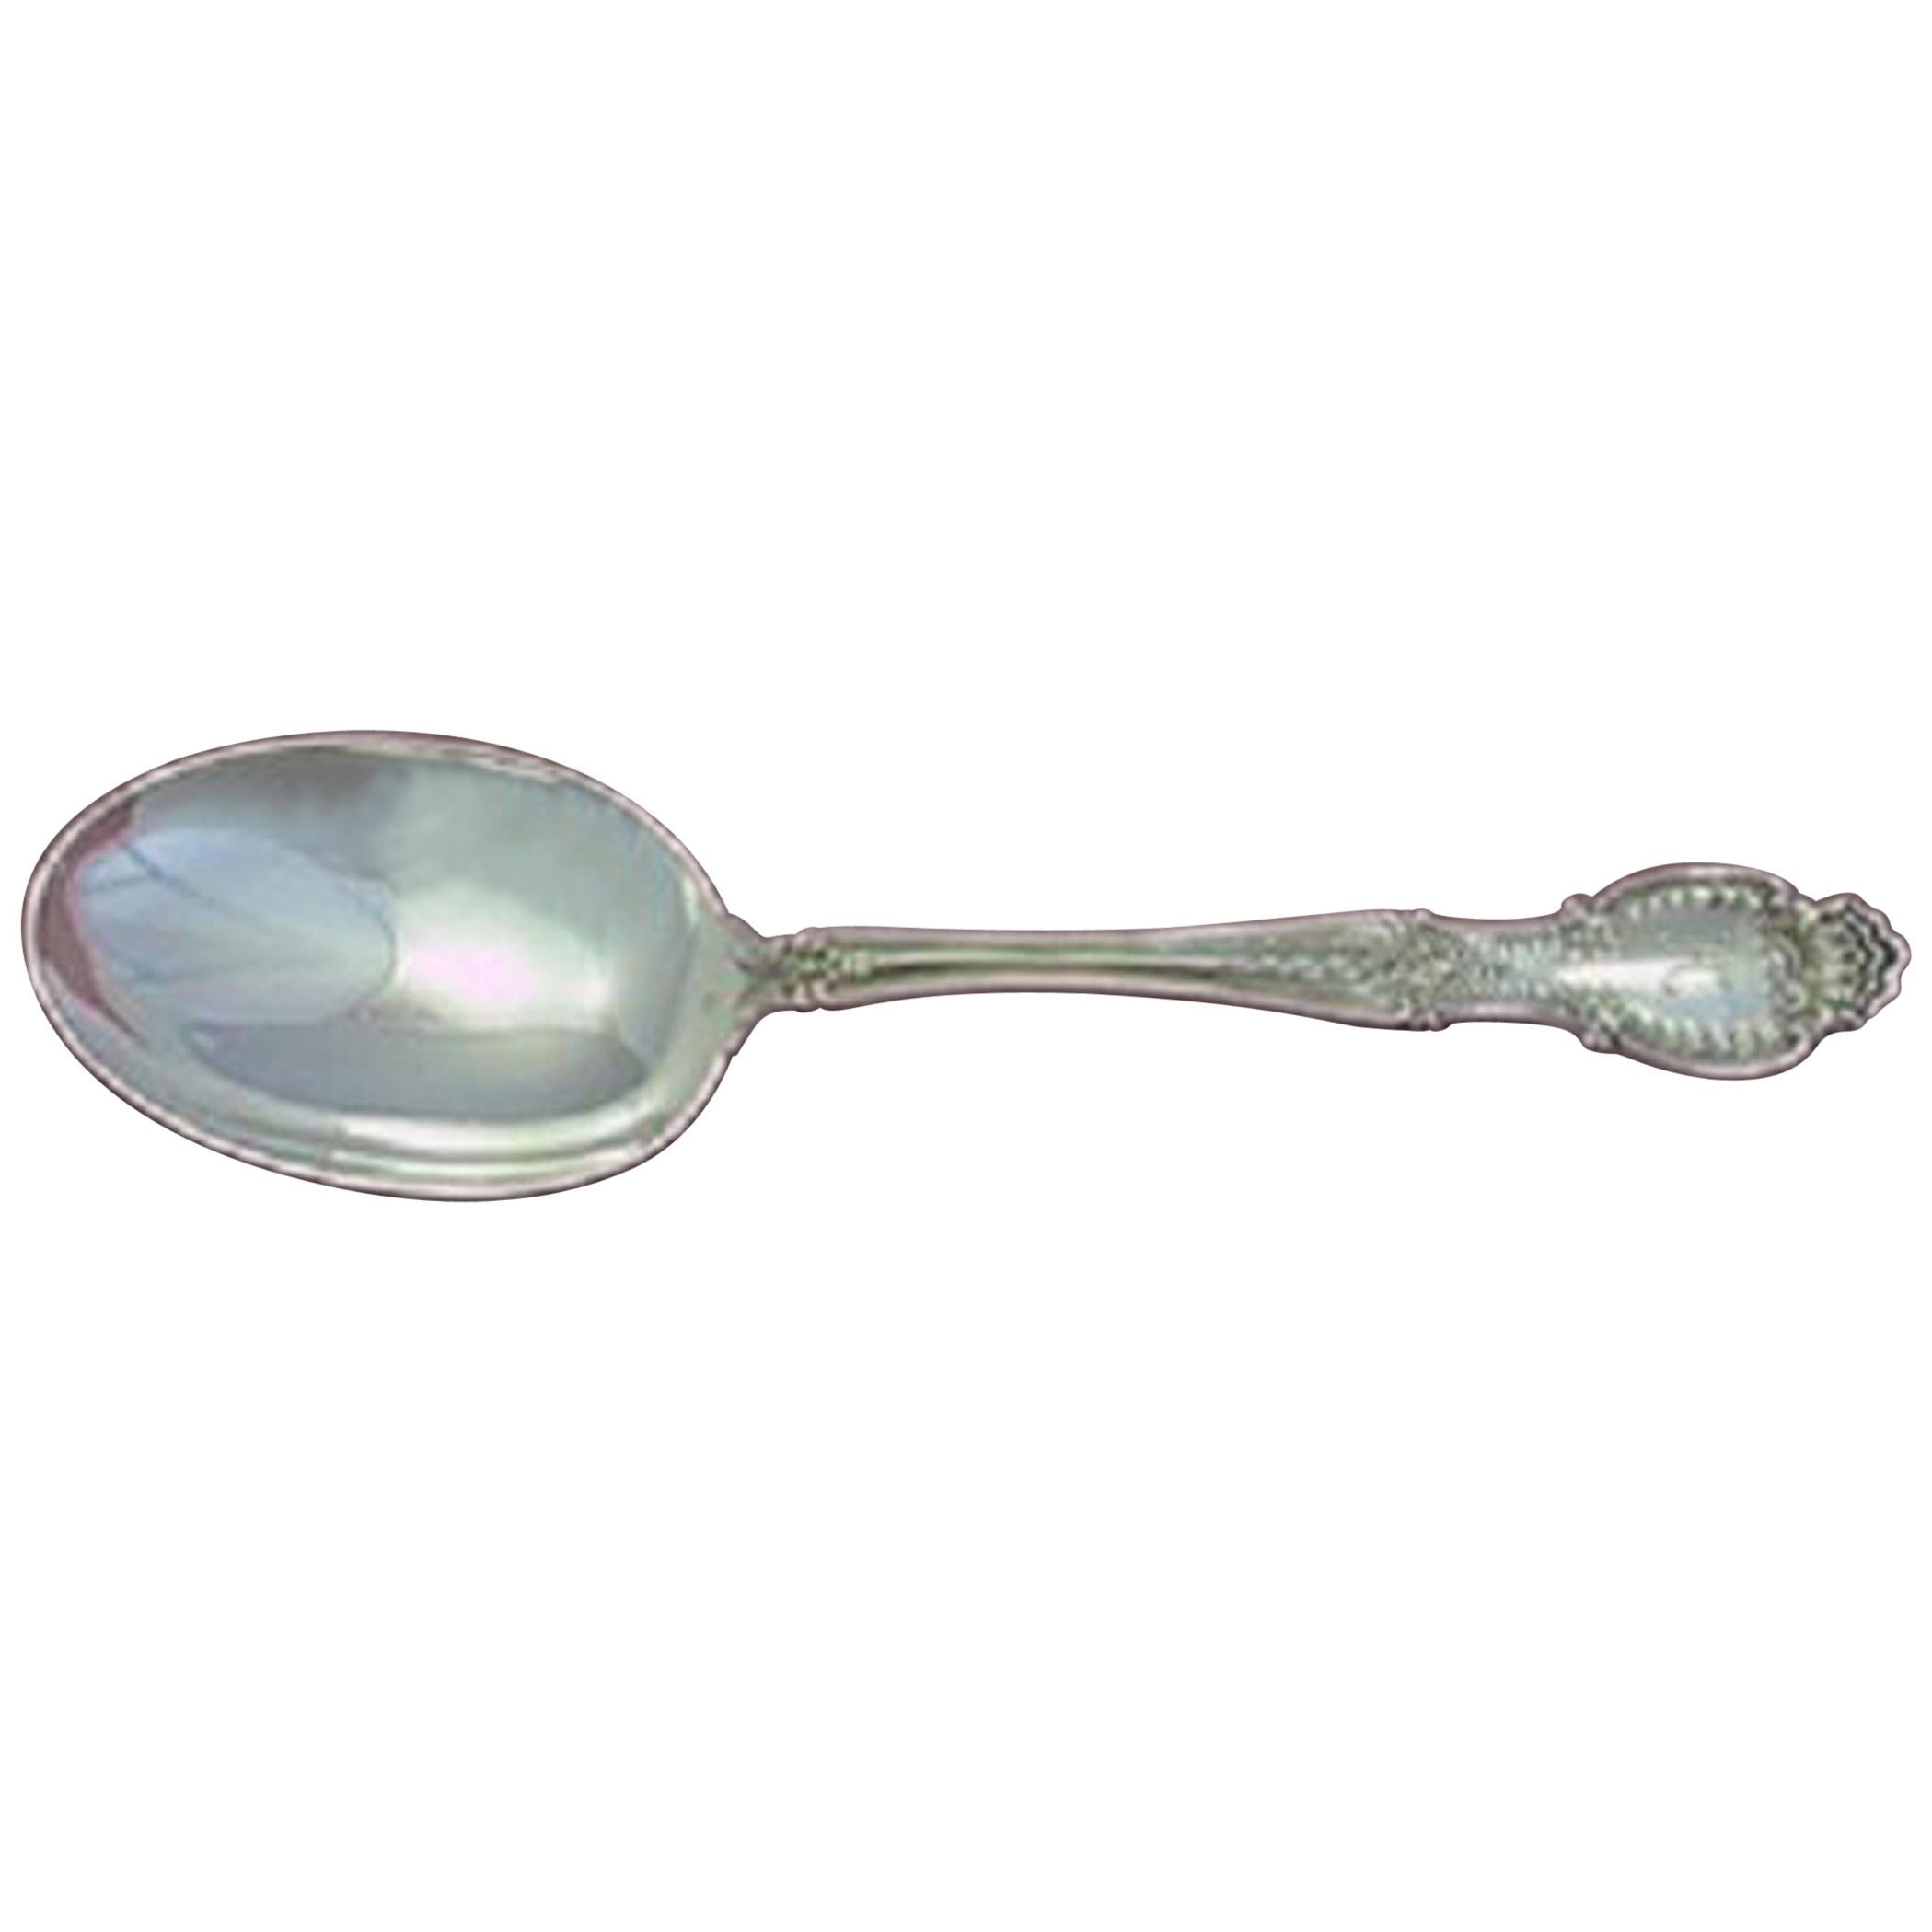 Richelieu by Tiffany & Co. Sterling Silver Vegetable Serving Spoon